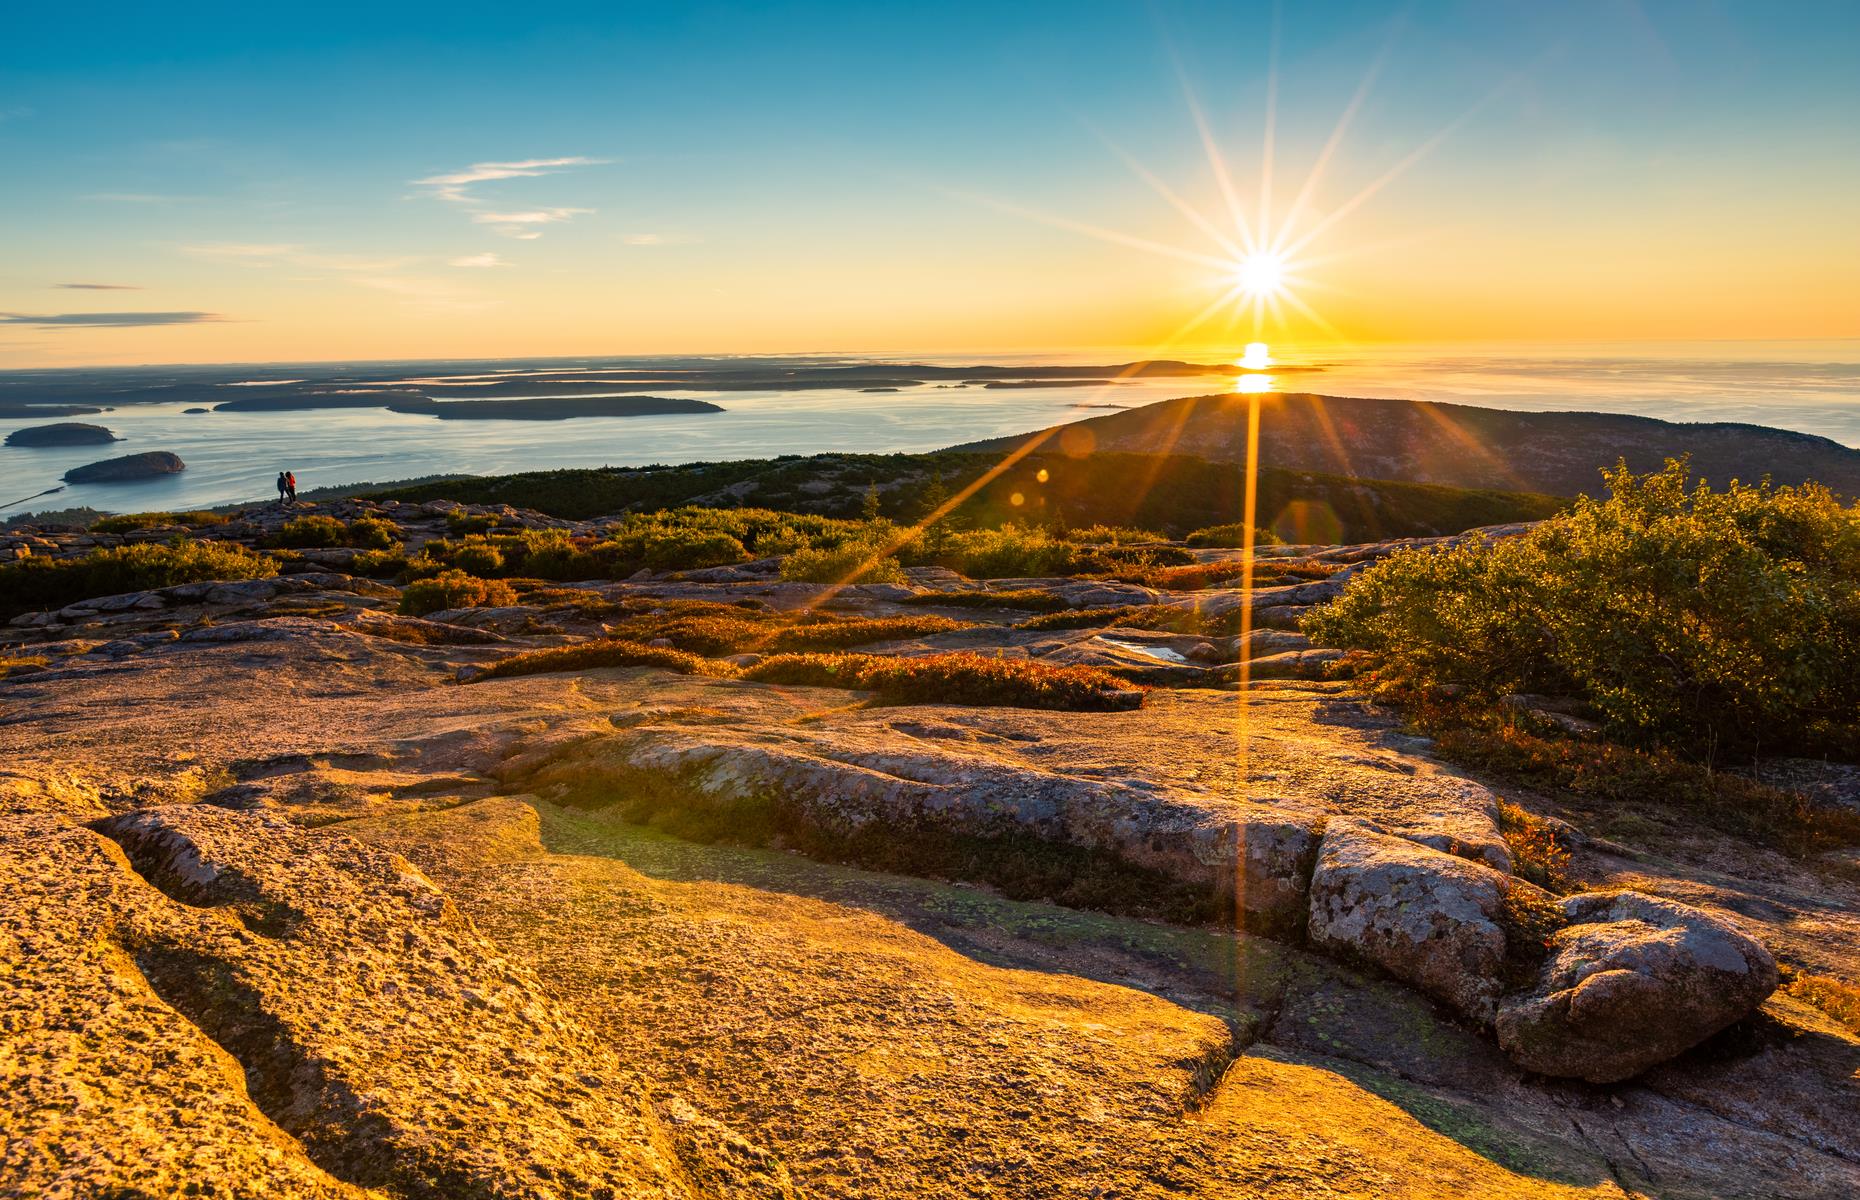 <p>Between October and March, Cadillac Mountain in <a href="https://www.nps.gov/acad/planyourvisit/placestogo.htm">Acadia National Park</a> is the first place in the US where the sky awakens and swirls with blazing red, orange and lilac. Of course, that means getting up earlier to see the sunrise, but there’s also something magical about witnessing the first light to hit the country. There’s a parking lot and a short walk to the summit. As always, make sure to <a href="https://www.nps.gov/acad/planyourvisit/conditions.htm">check </a>if there are any closures inside the park due to changing weather conditions. </p>